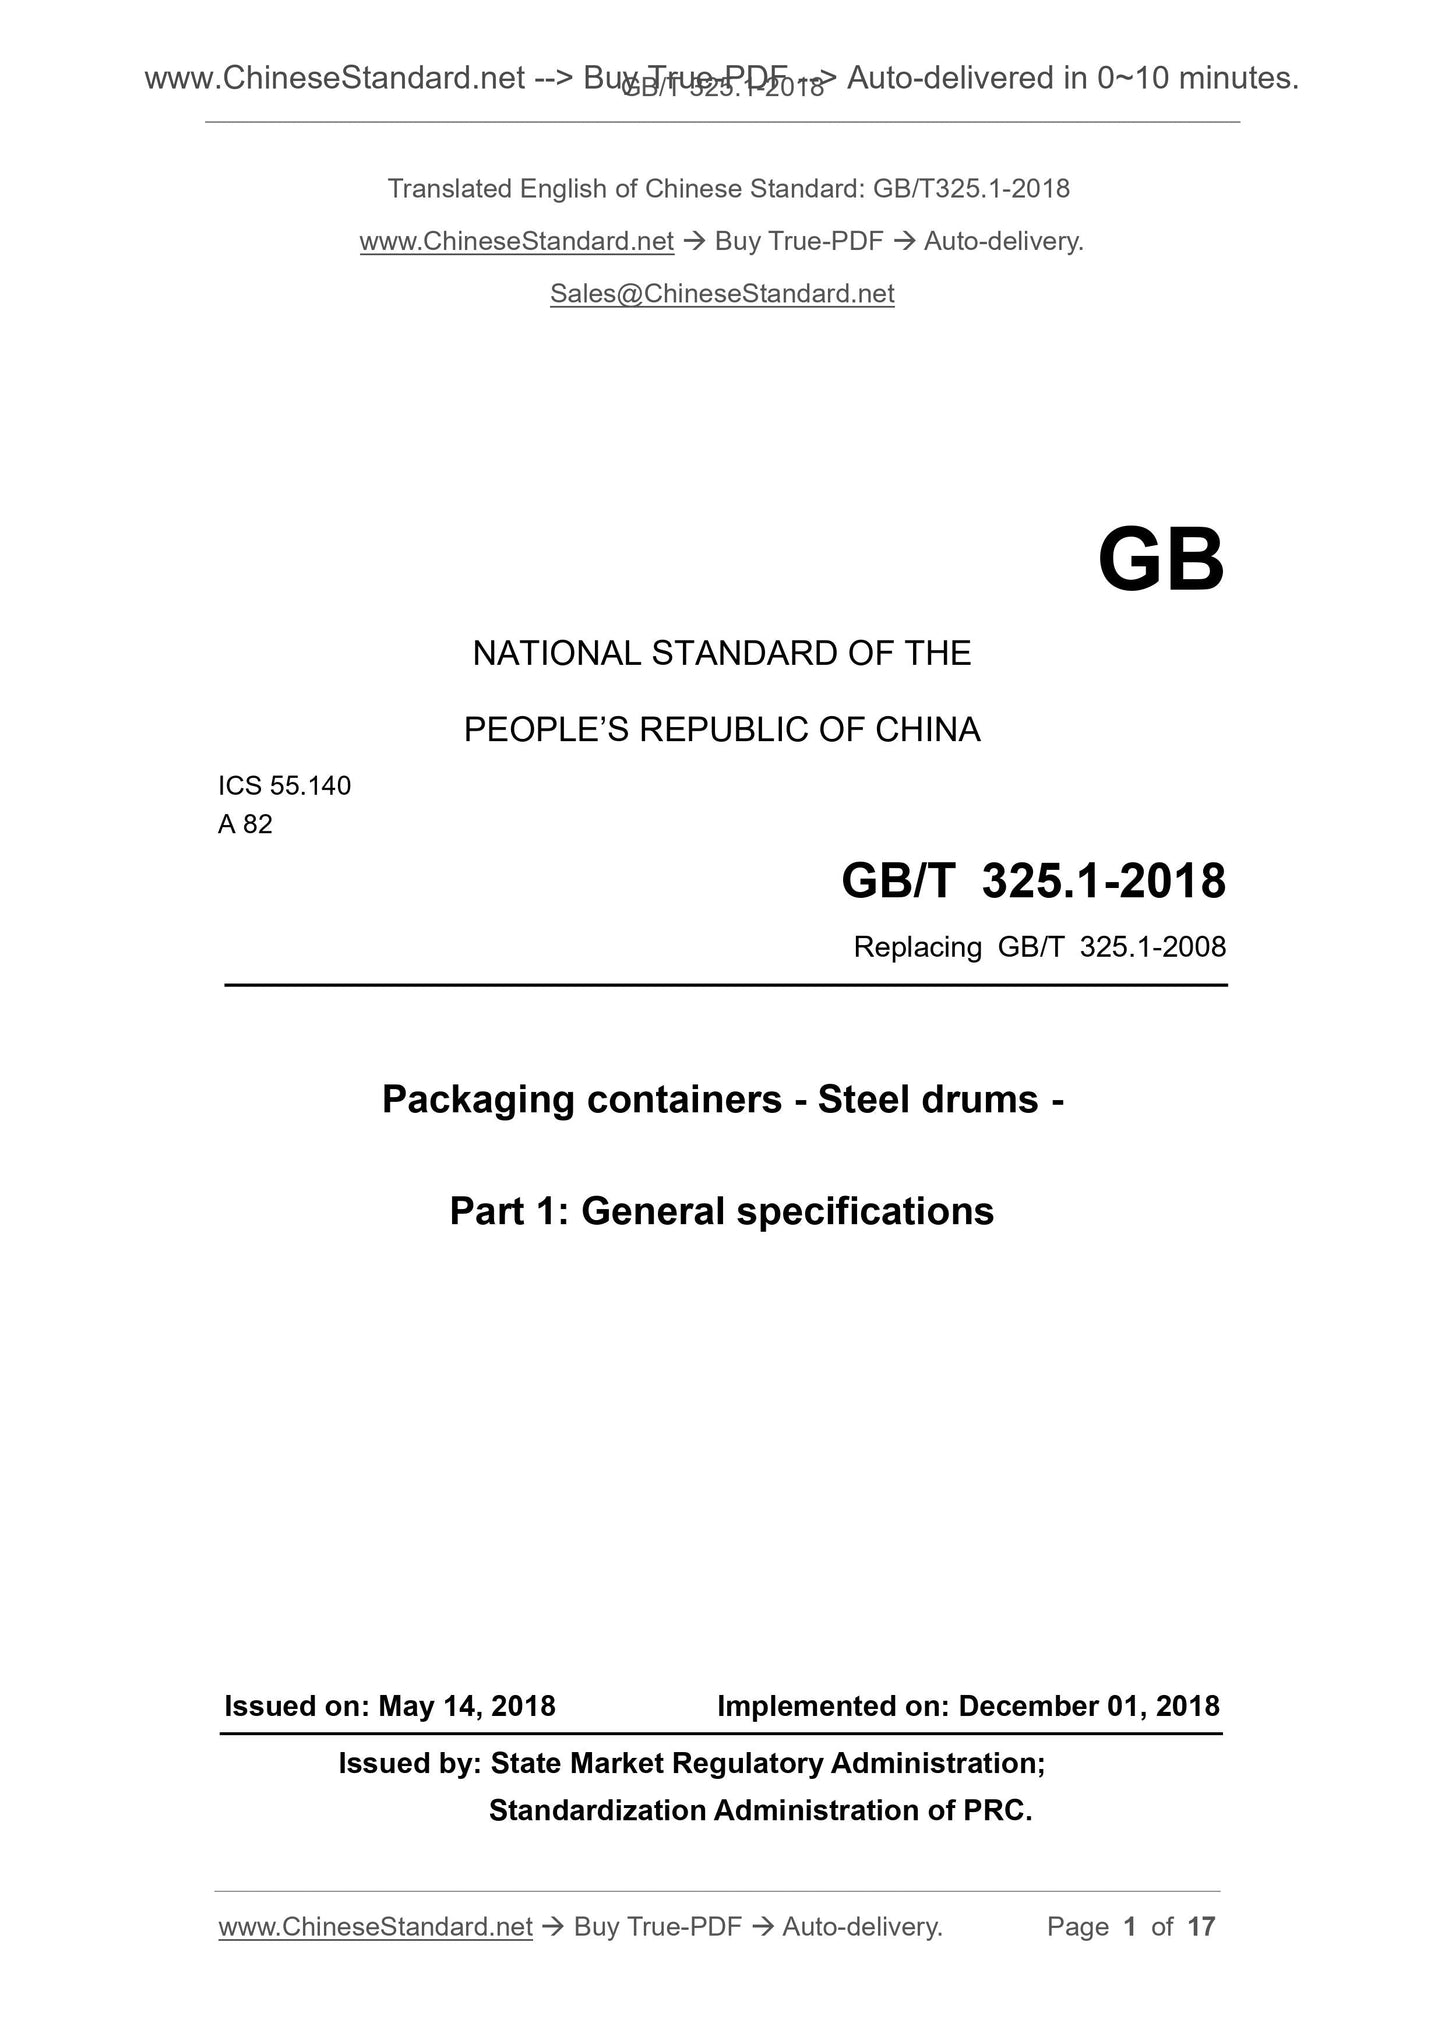 GB/T 325.1-2018 Page 1